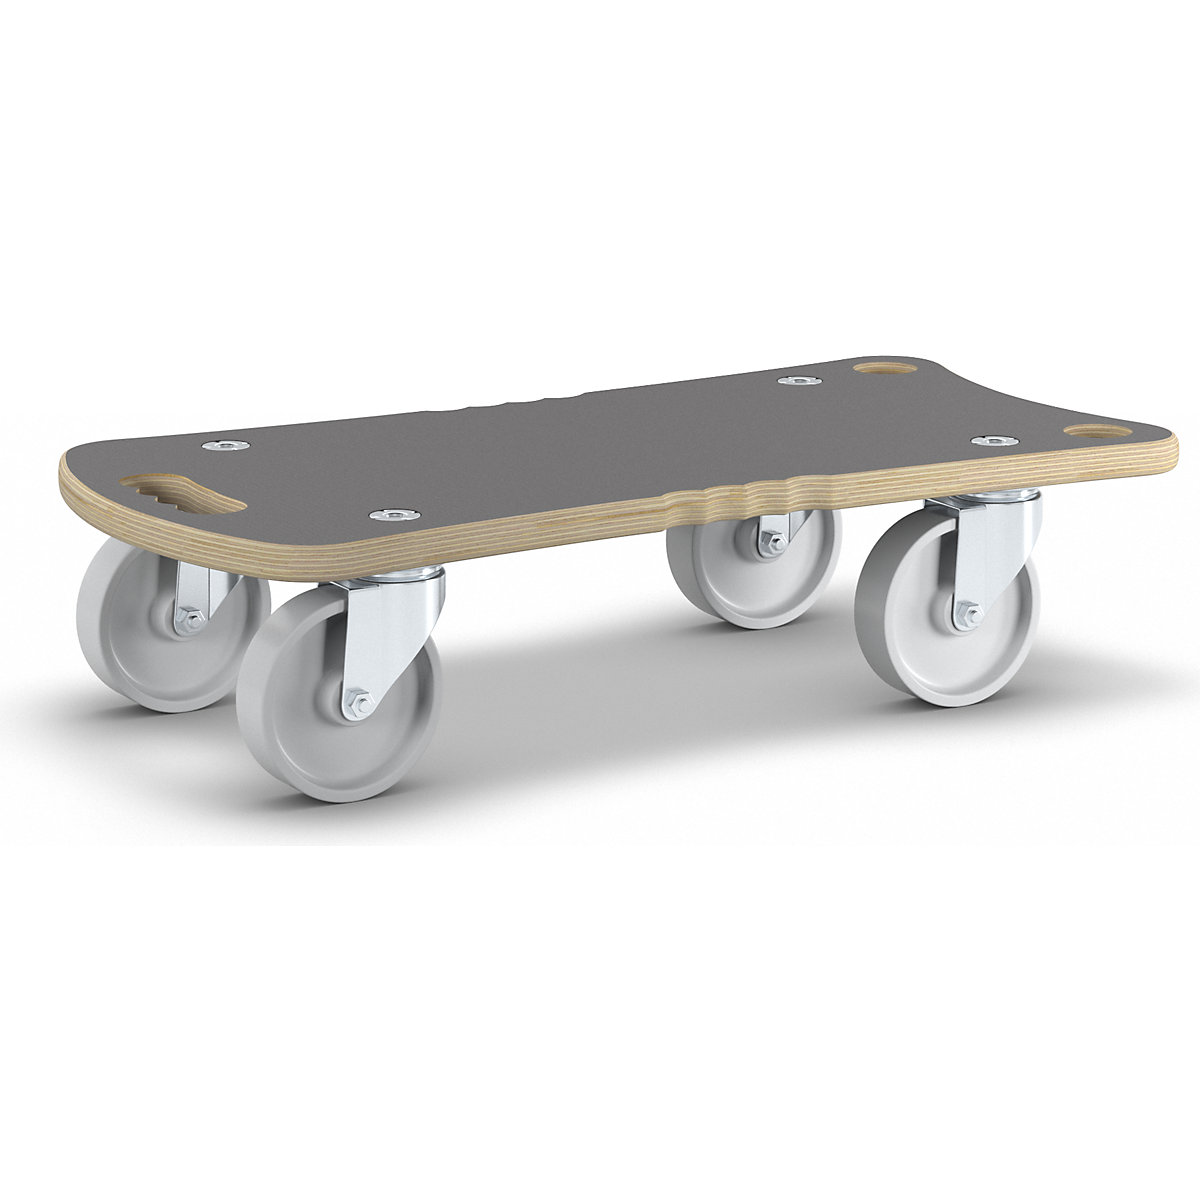 MaxiGRIP transport dolly – Wagner